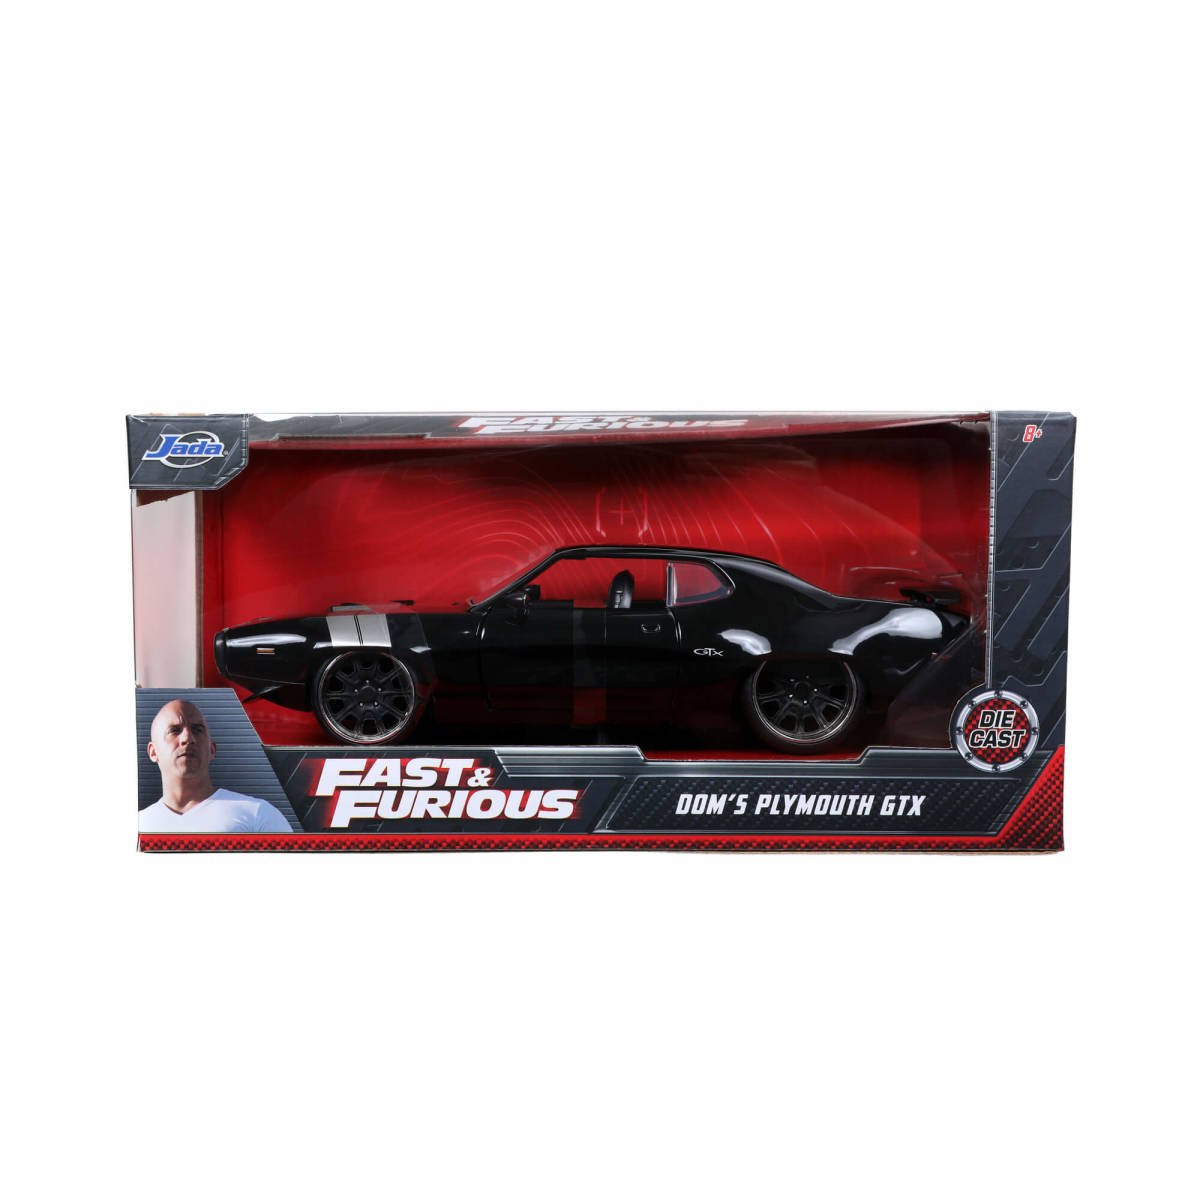 JADATOYS 1:24 The Fast and The Furious die-cast car DOM'S PLYMOUTH GTX